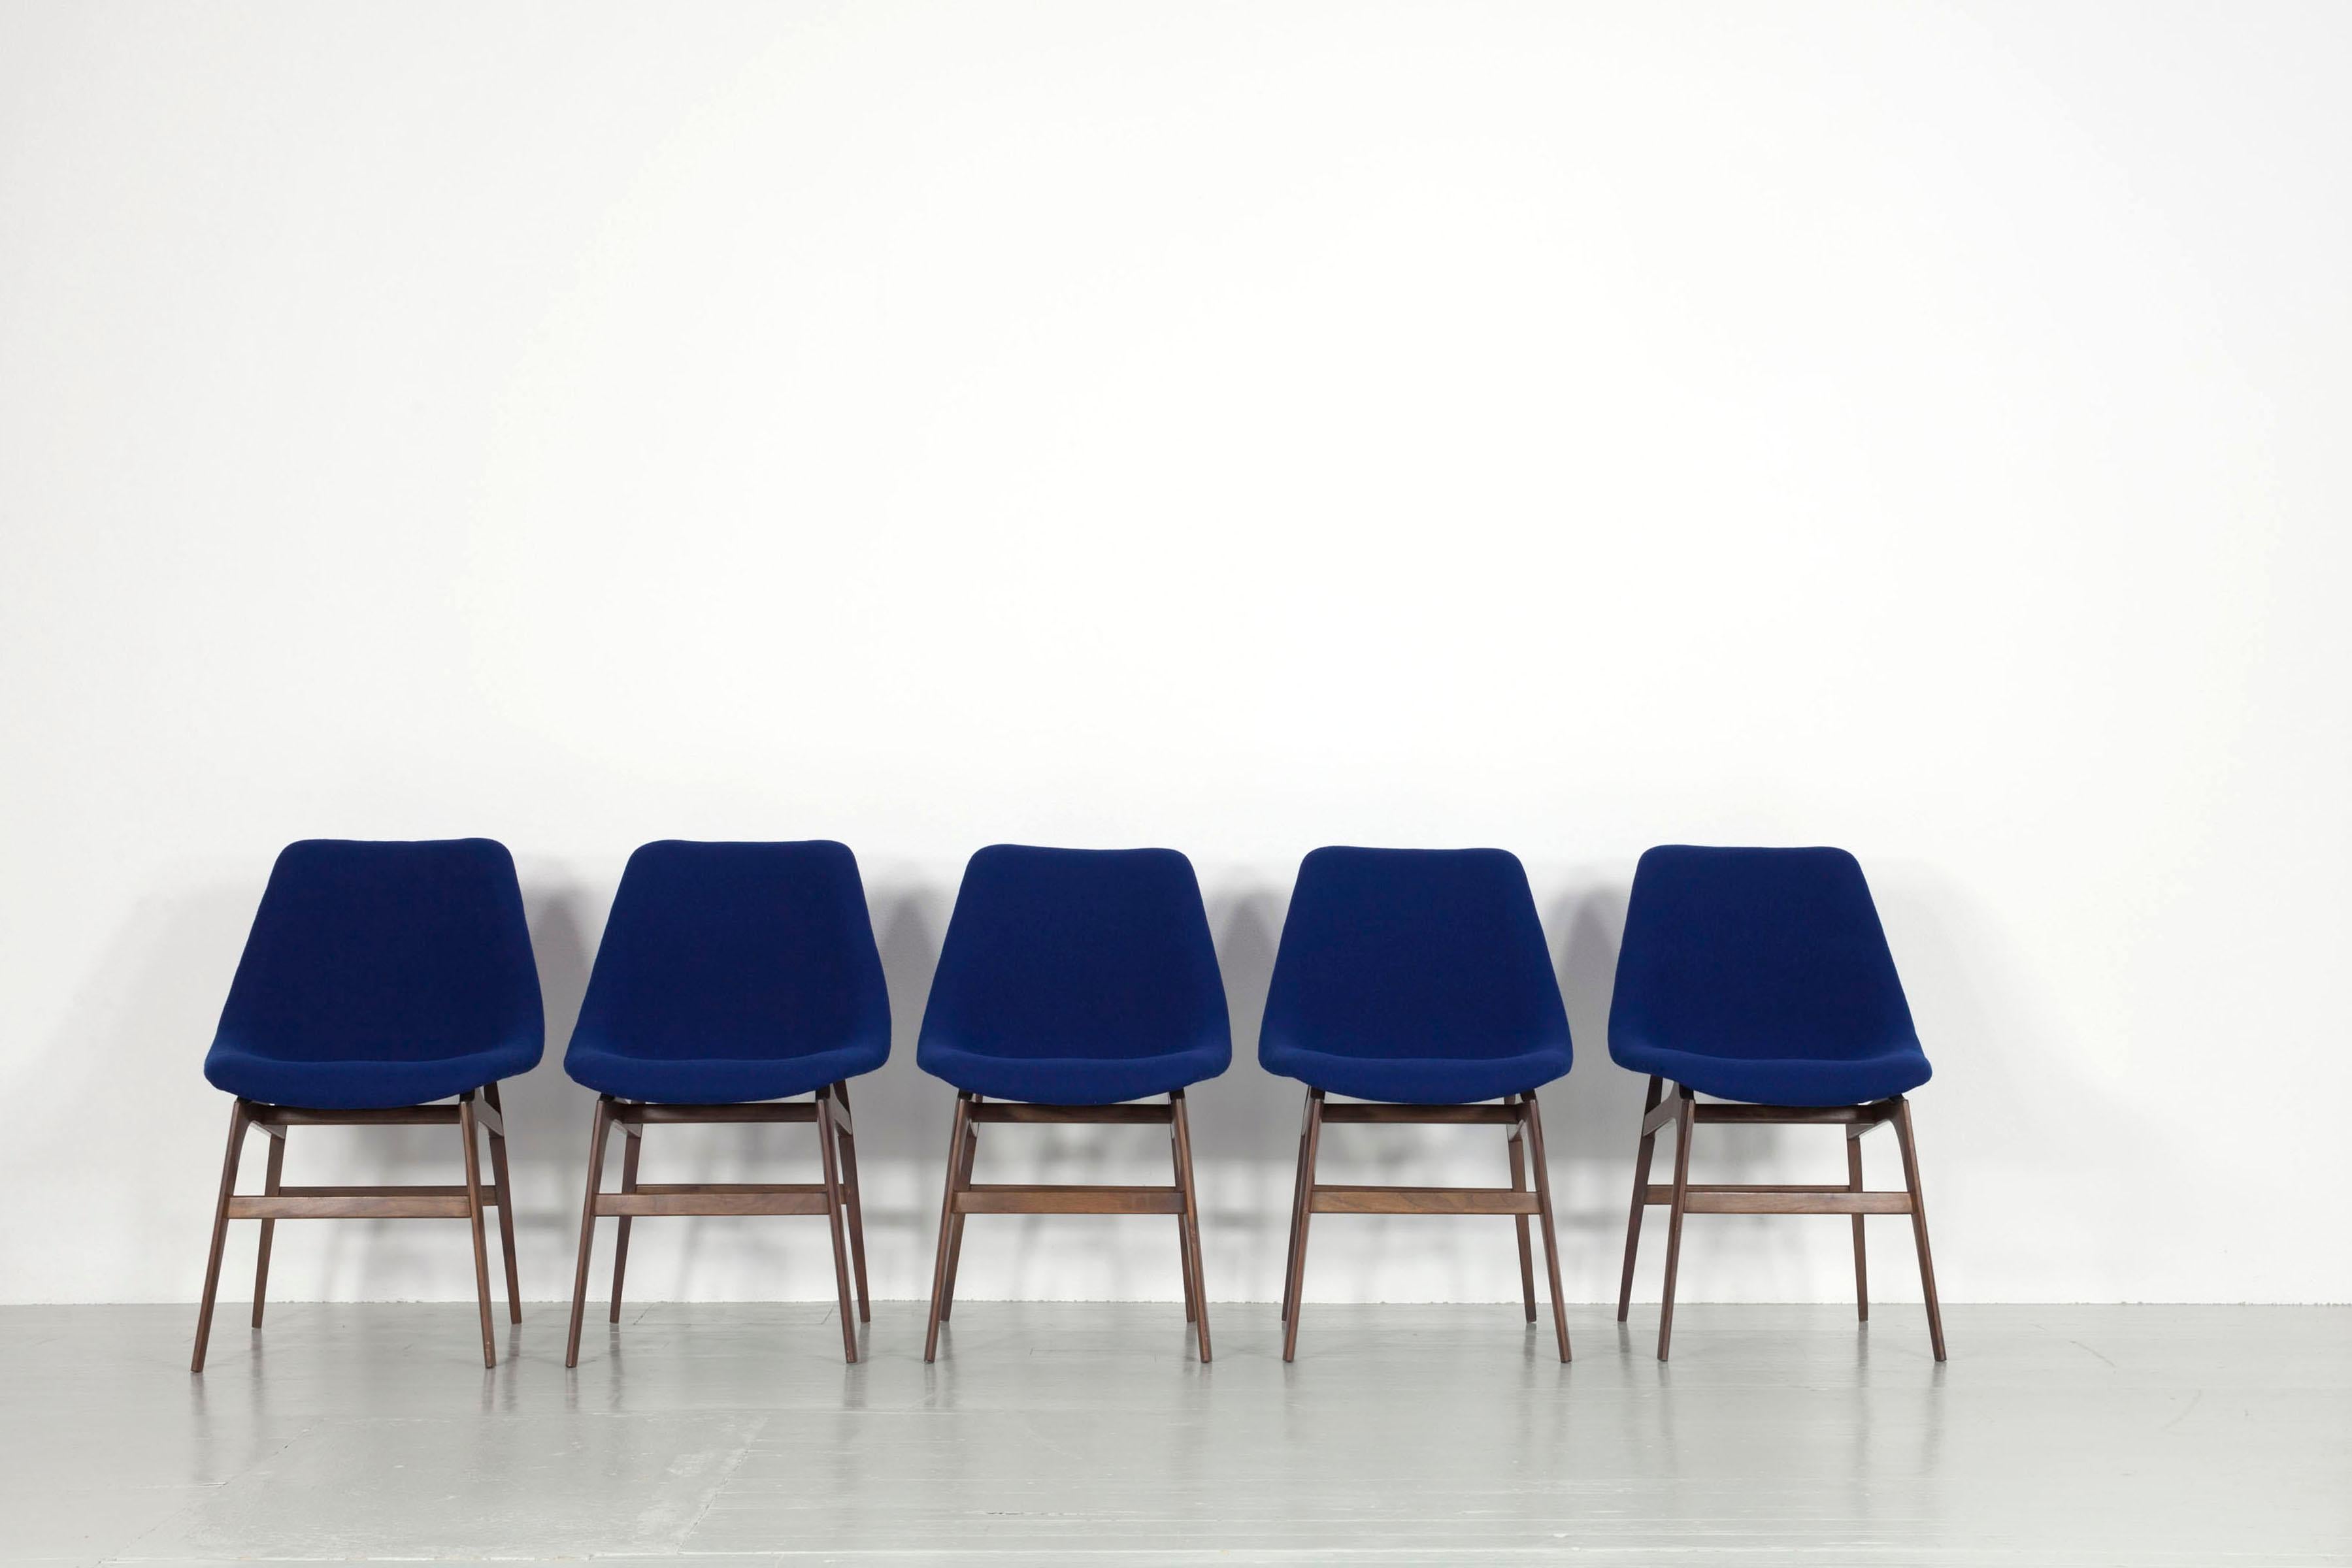 This set of six chairs was made in Italy in the 1960s and marketed by the Busnelli di Meda company. The sturdy teak chair frames show signs of wear. The seat consists of a fibreglass shell upholstered in foam with a dark blue cover. The upholstery